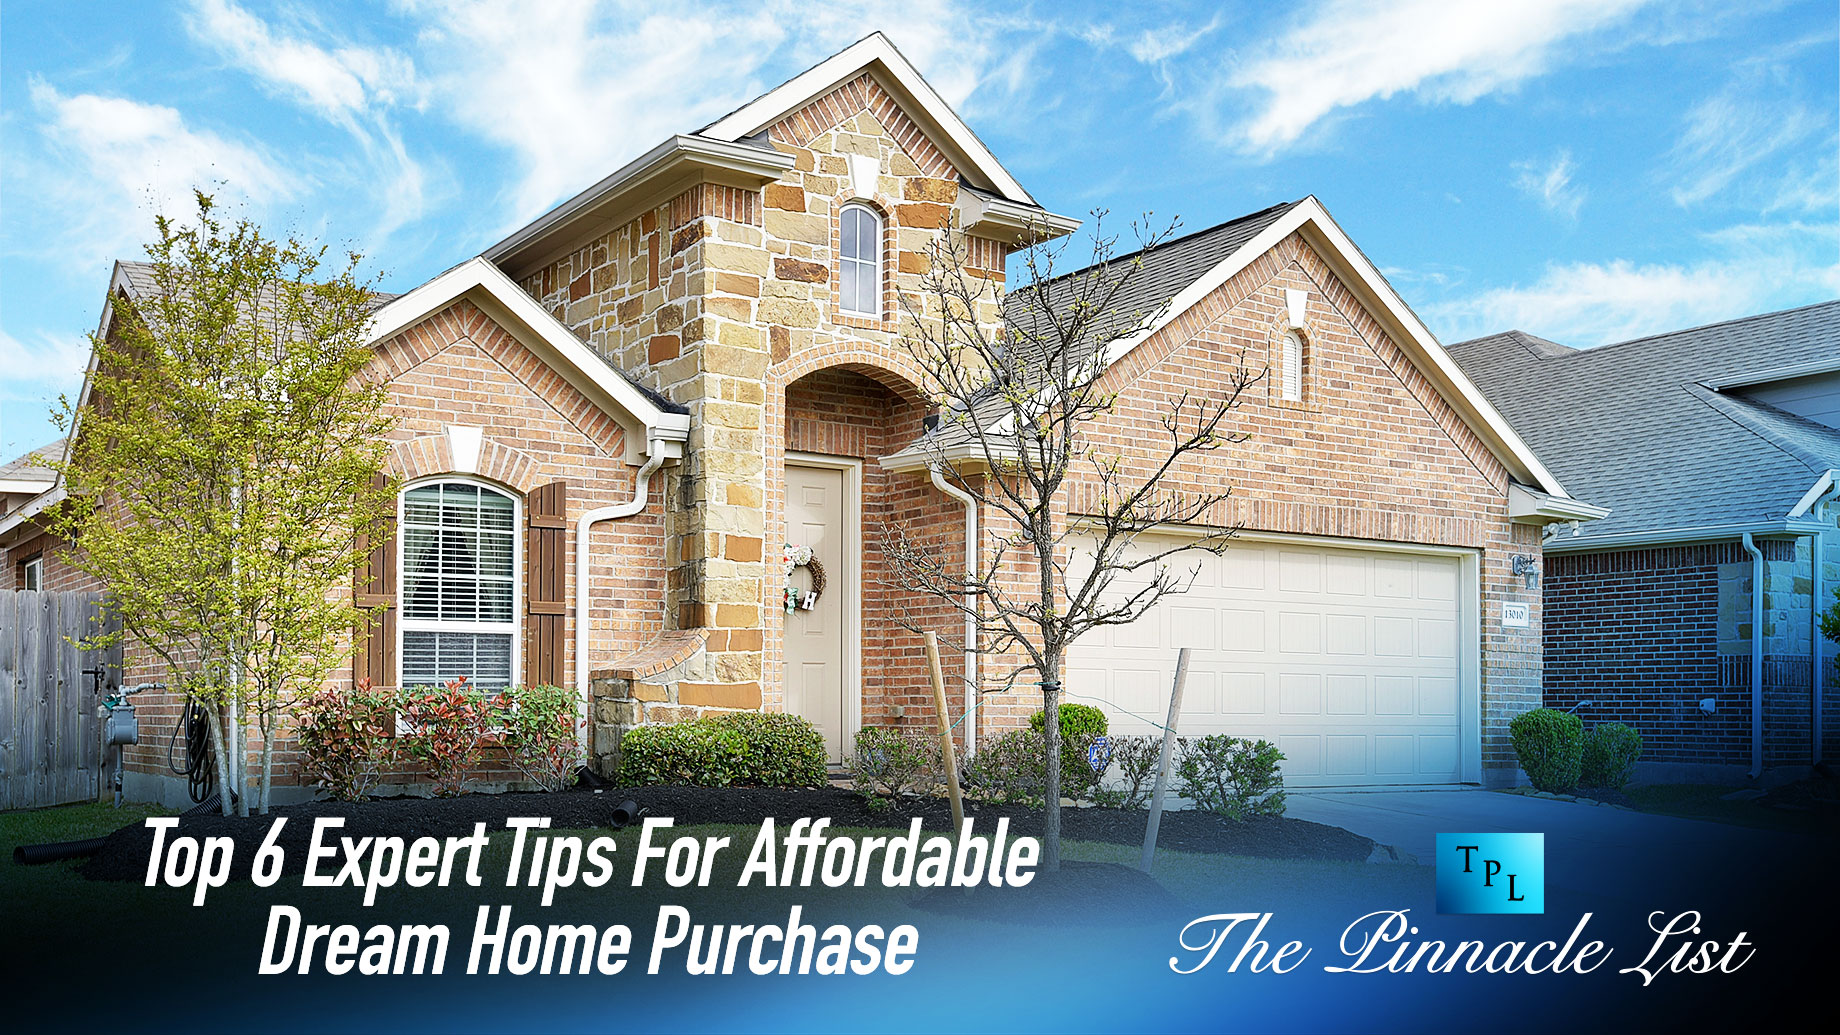 Top 6 Expert Tips For Affordable Dream Home Purchase